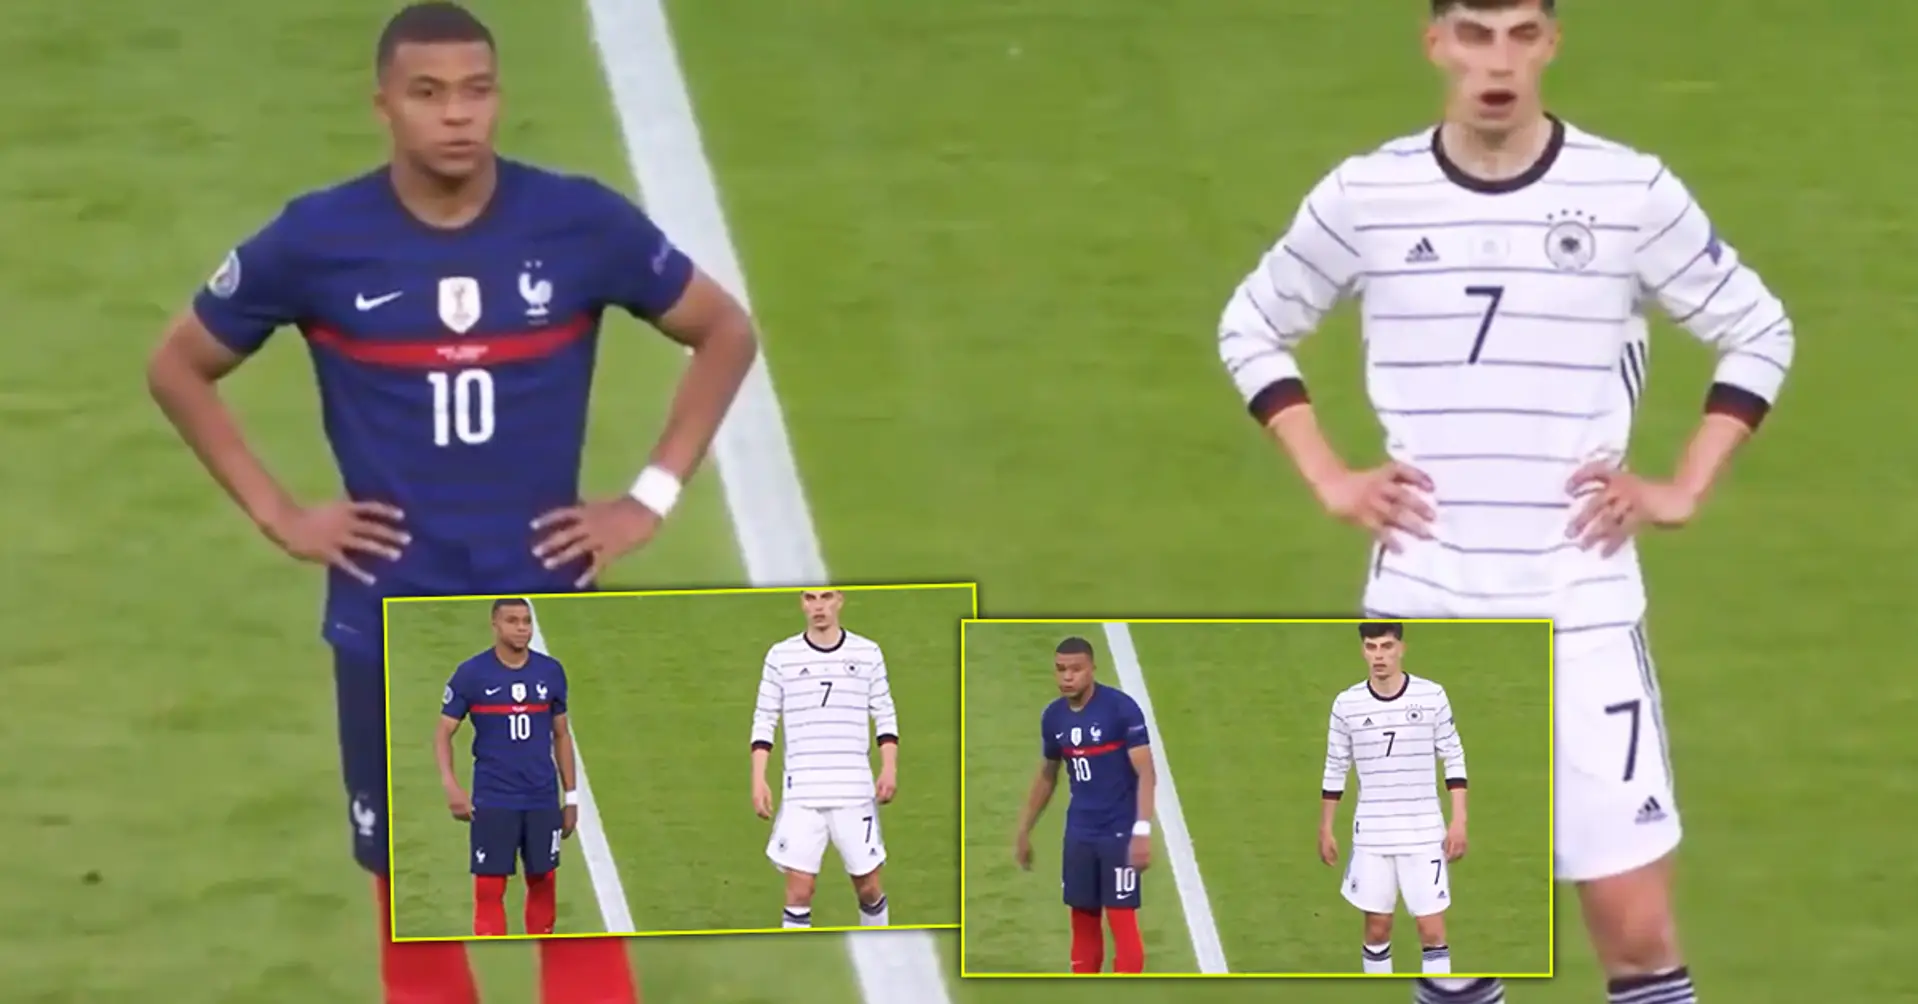 Kai Havertz caught on camera copying literally everything Kylian Mbappe does